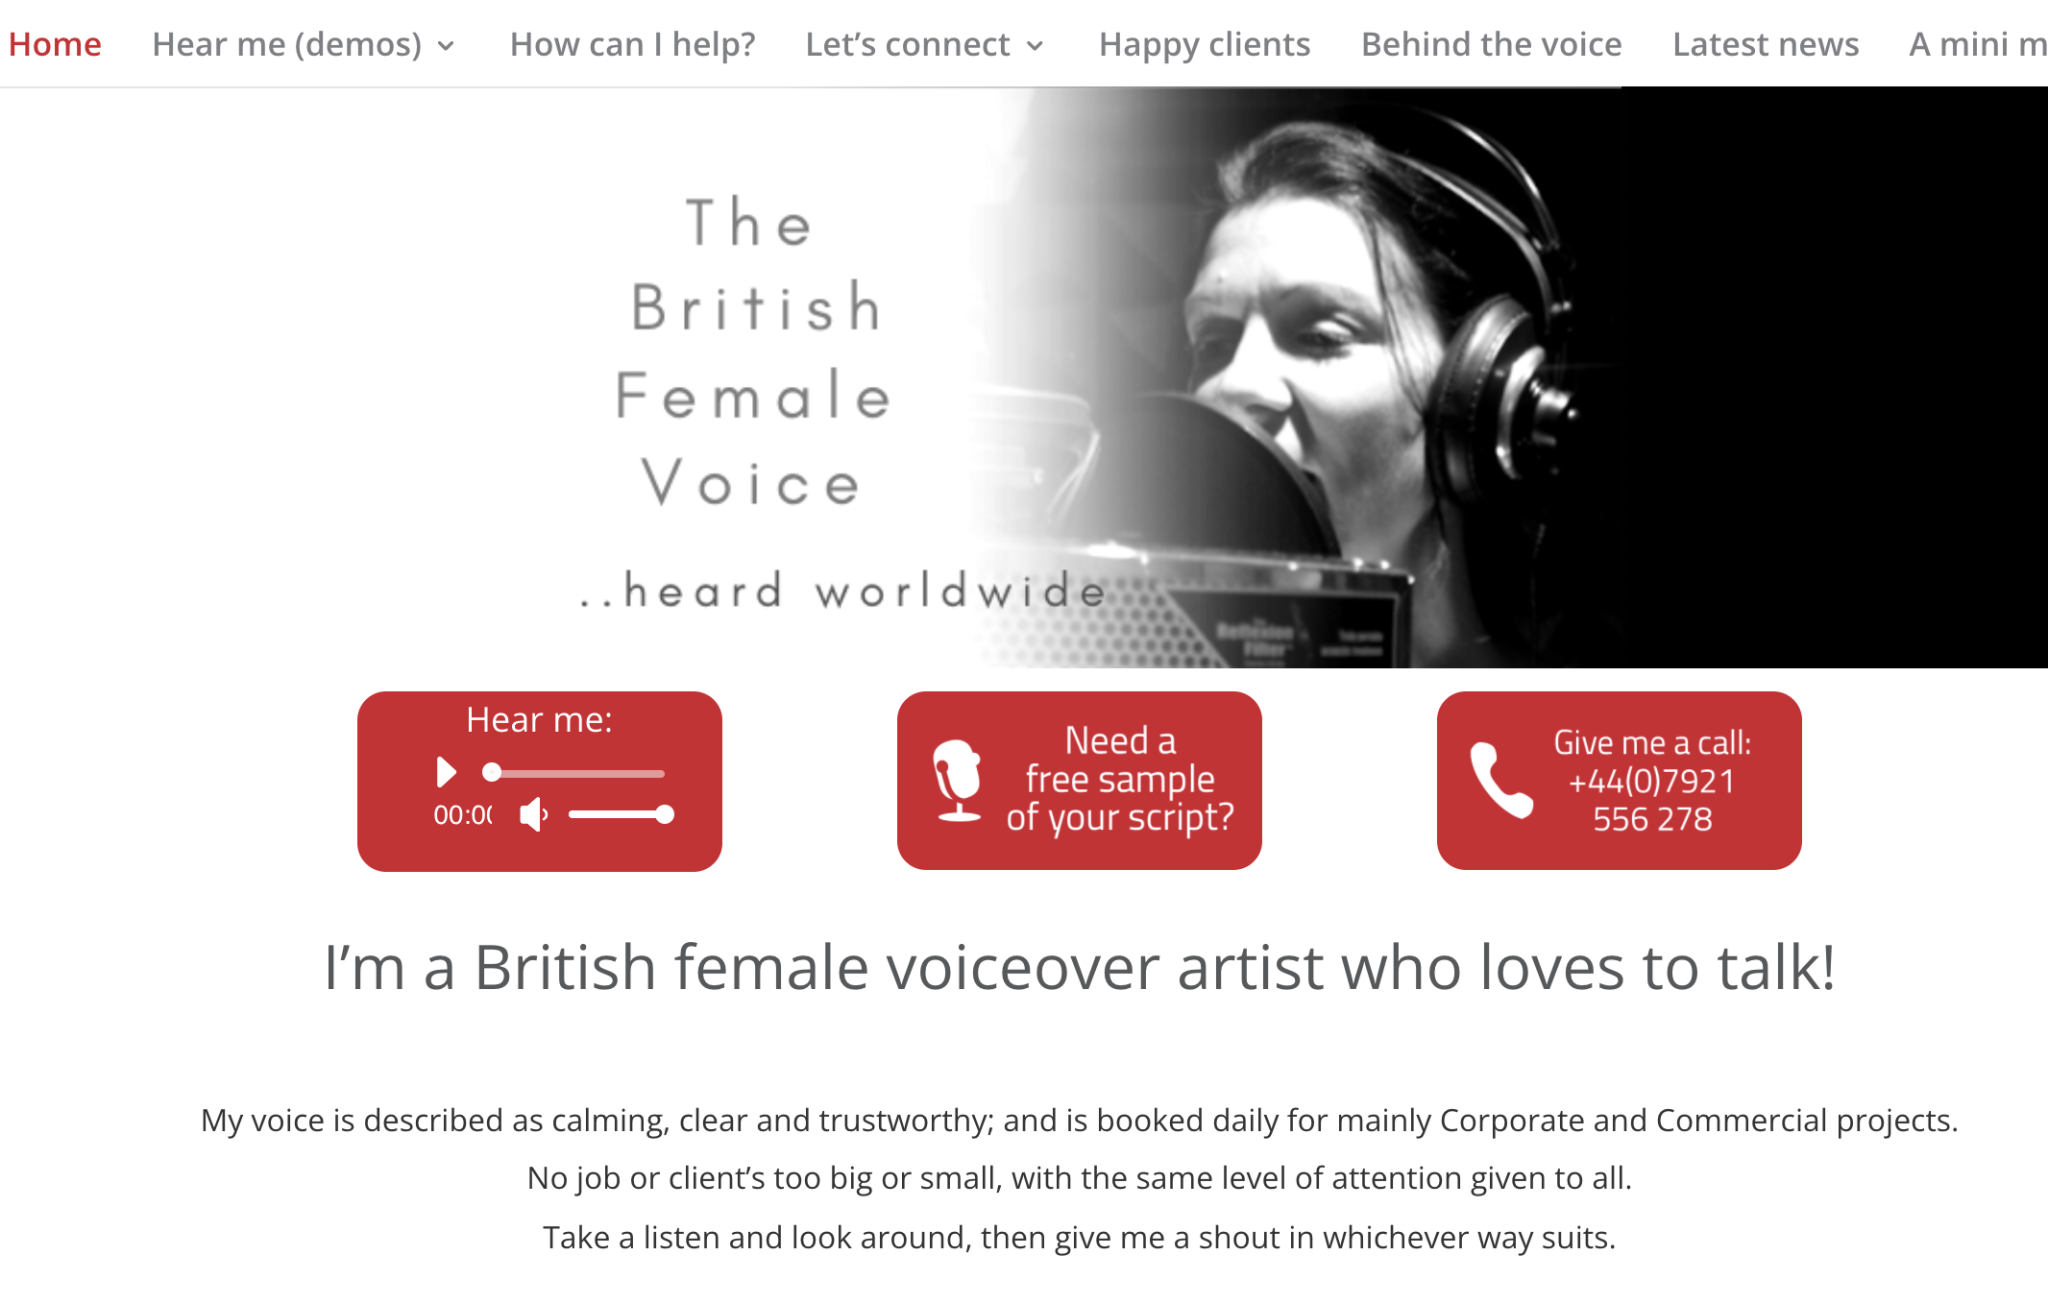 Promoting others VOICEOVER ARTIST